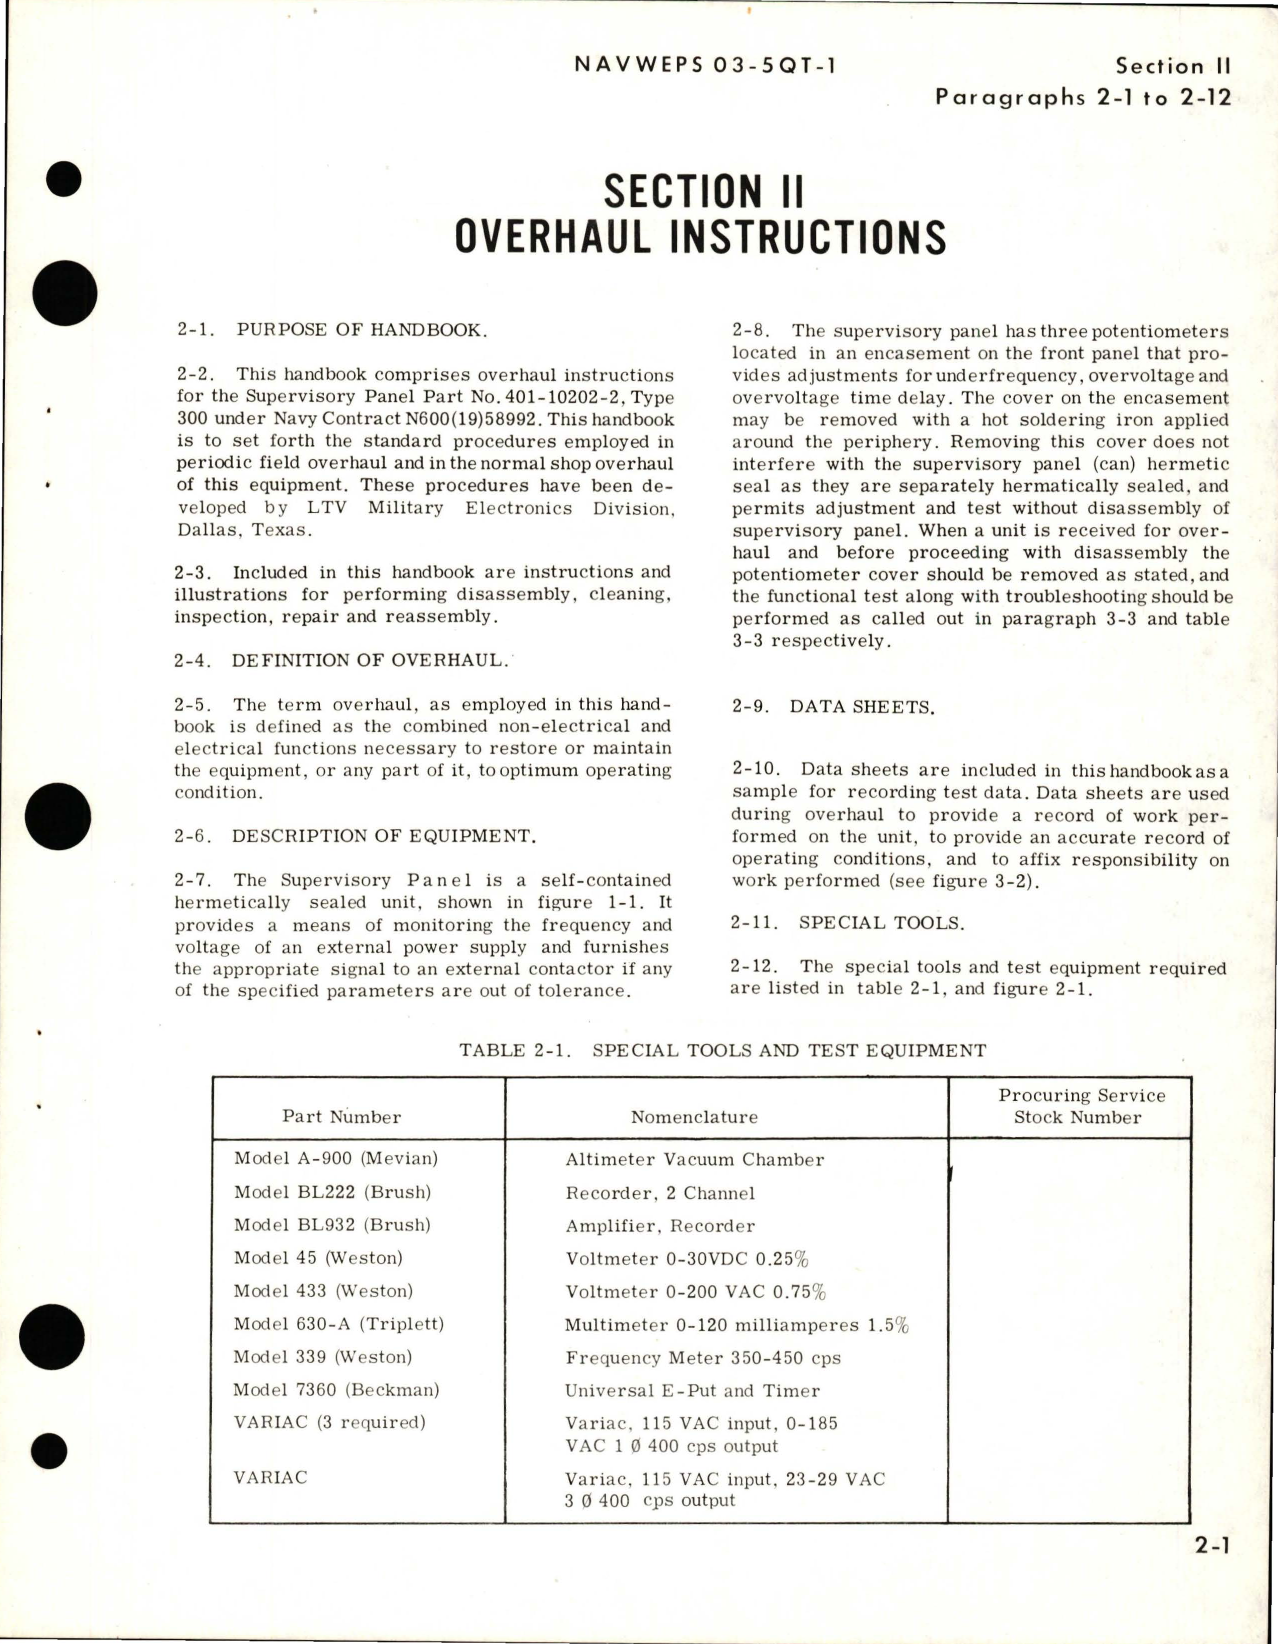 Sample page 7 from AirCorps Library document: Overhaul Instruction for Supervisory Panel - Type C-300 - Part 401-10202-2